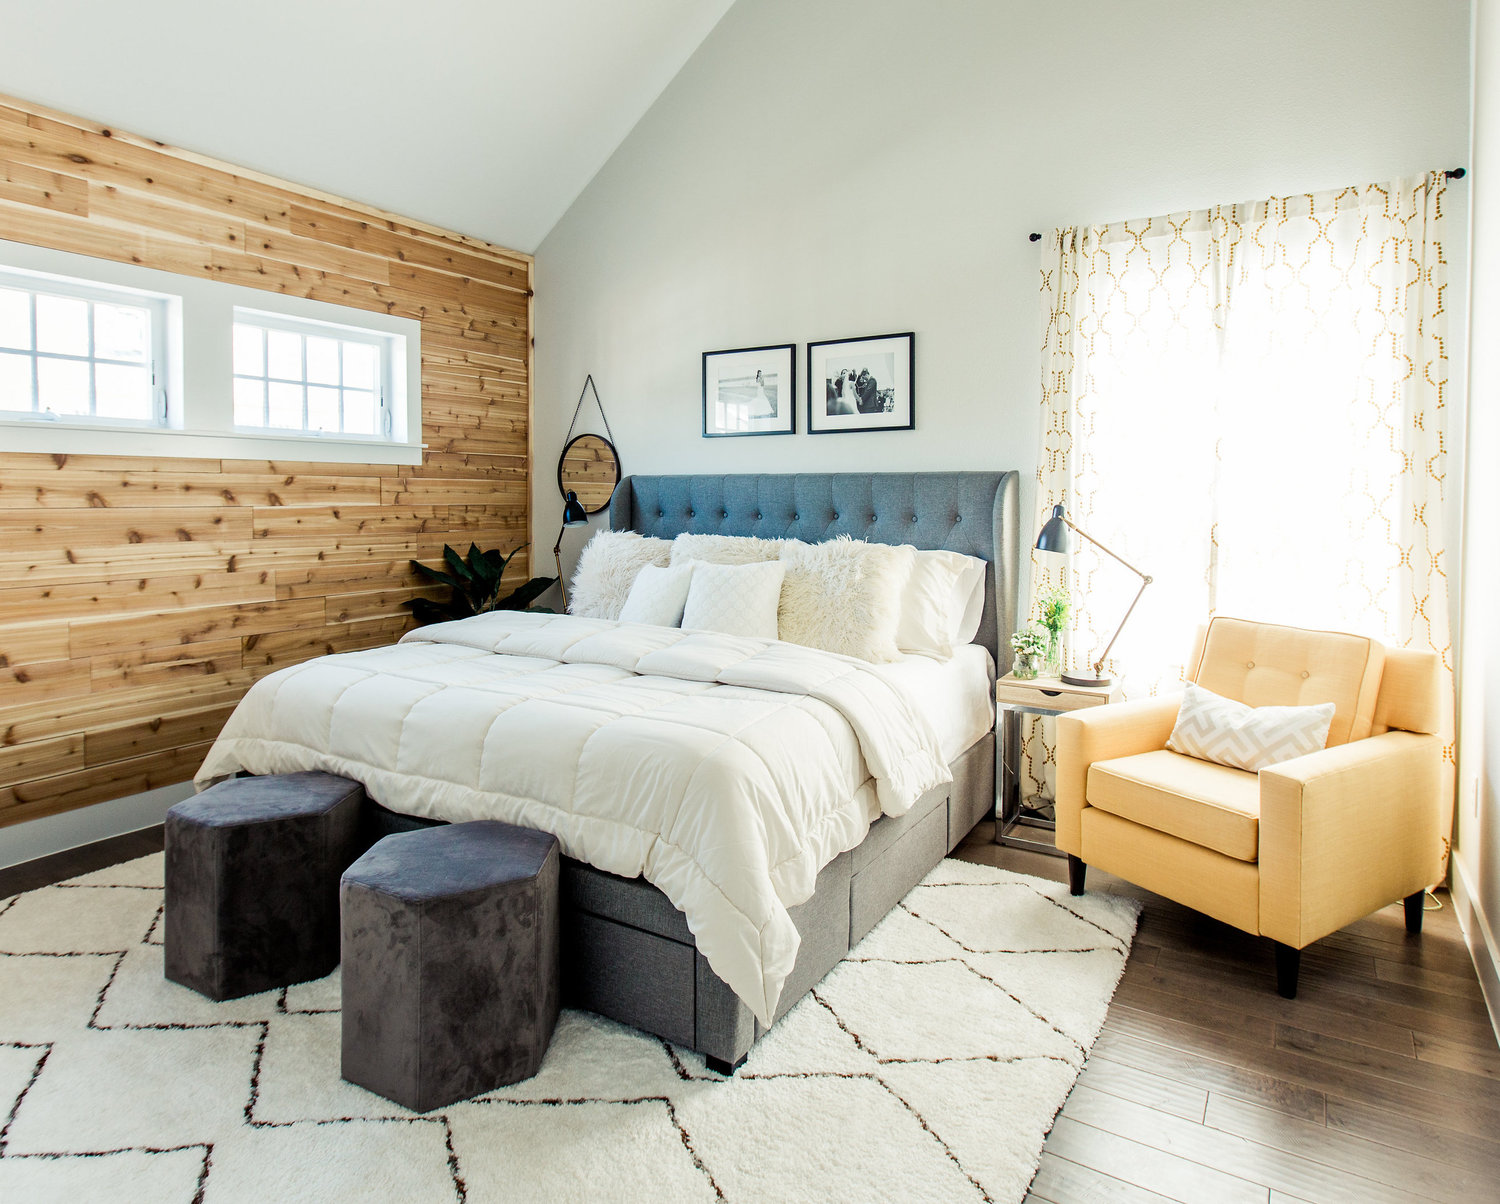 The bed, side tables, and side chair in my Urban Rustic Retreat project all came from Wayfair.